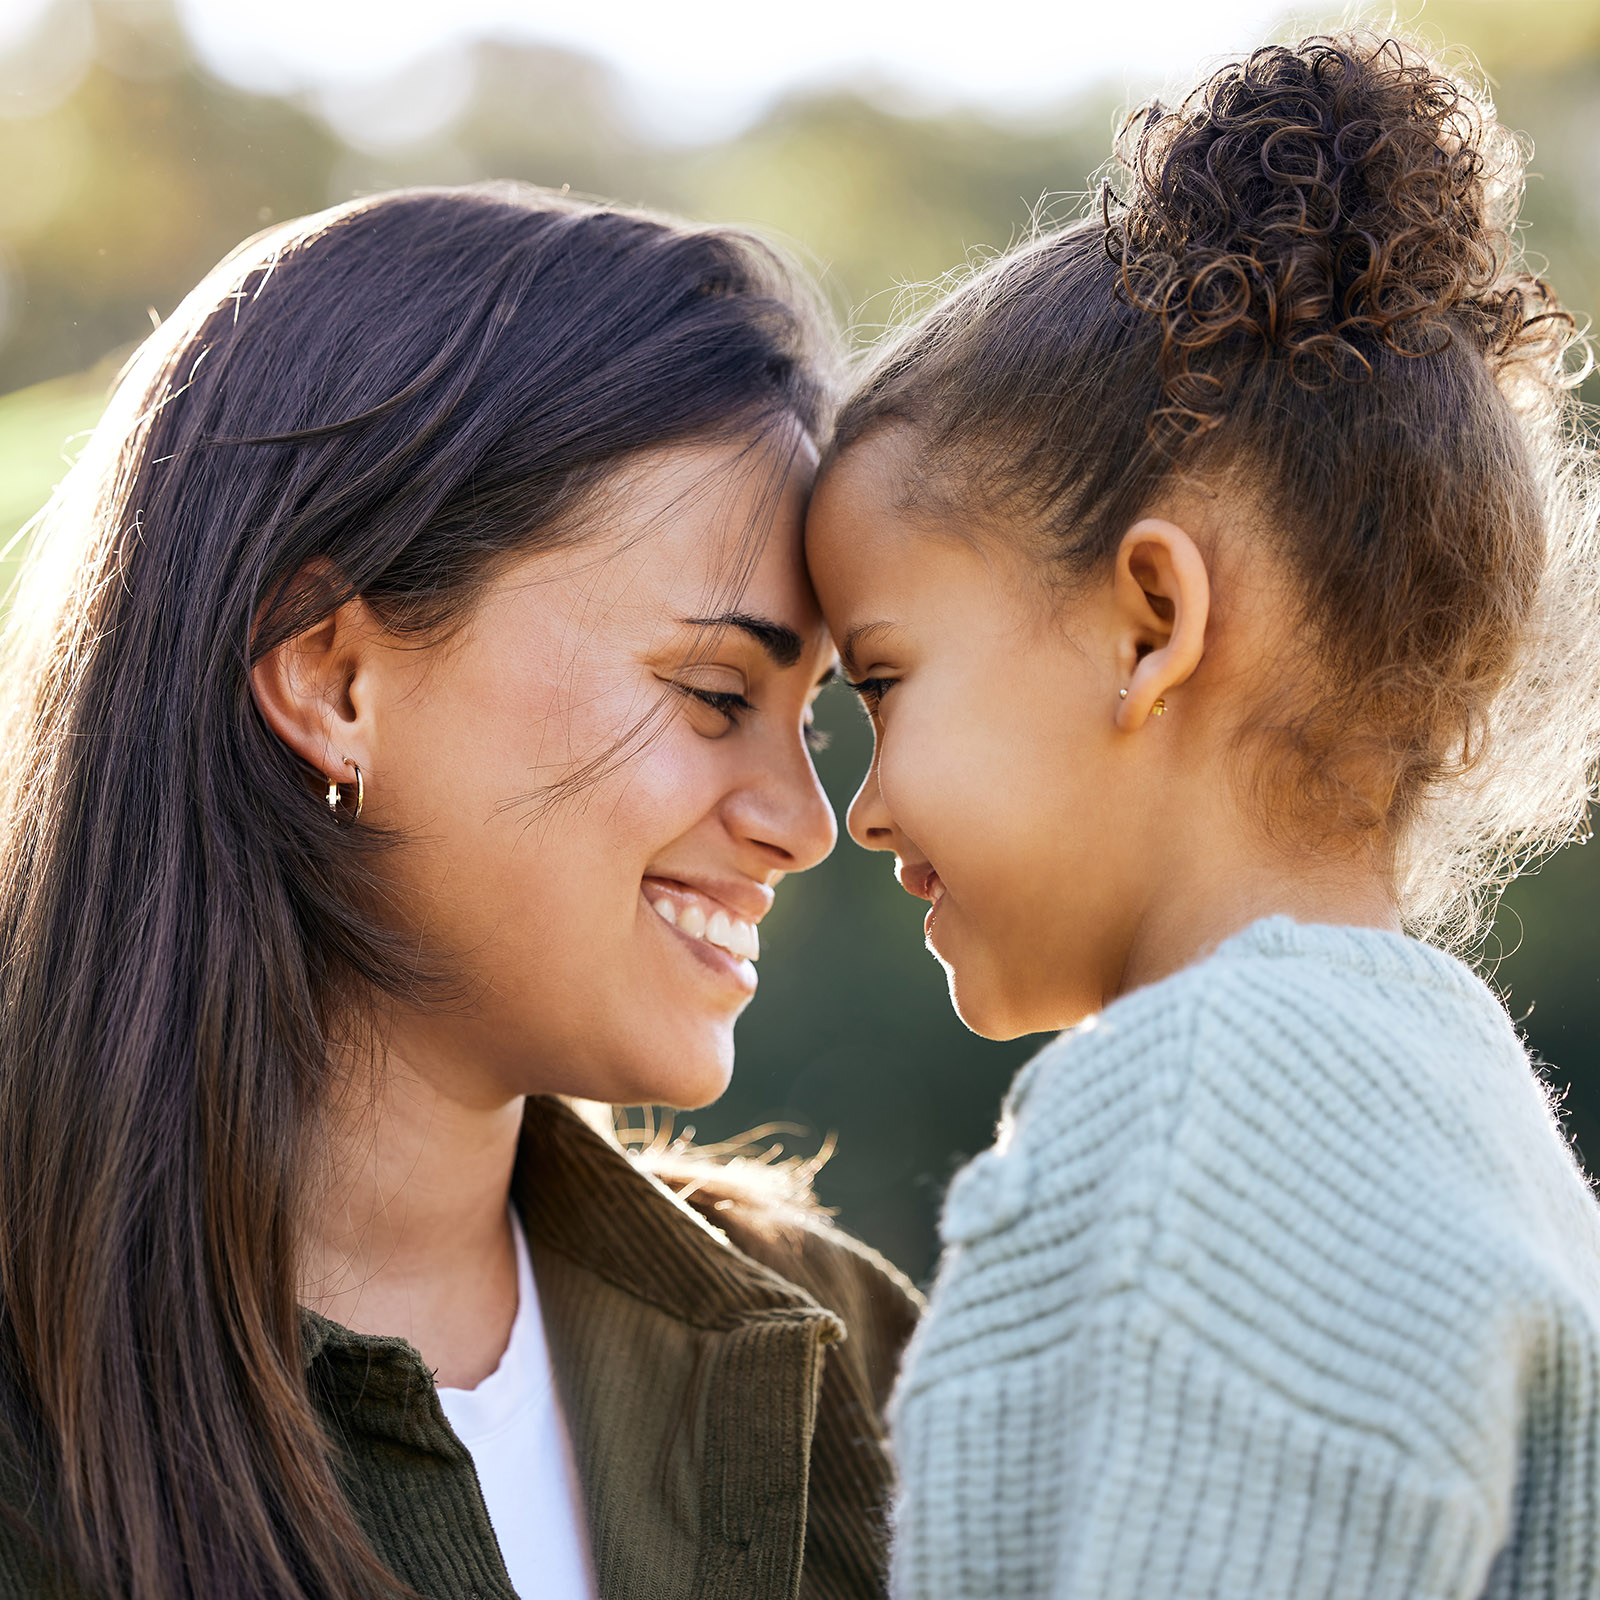 Mom holding daughter touching foreheads smiling while outside